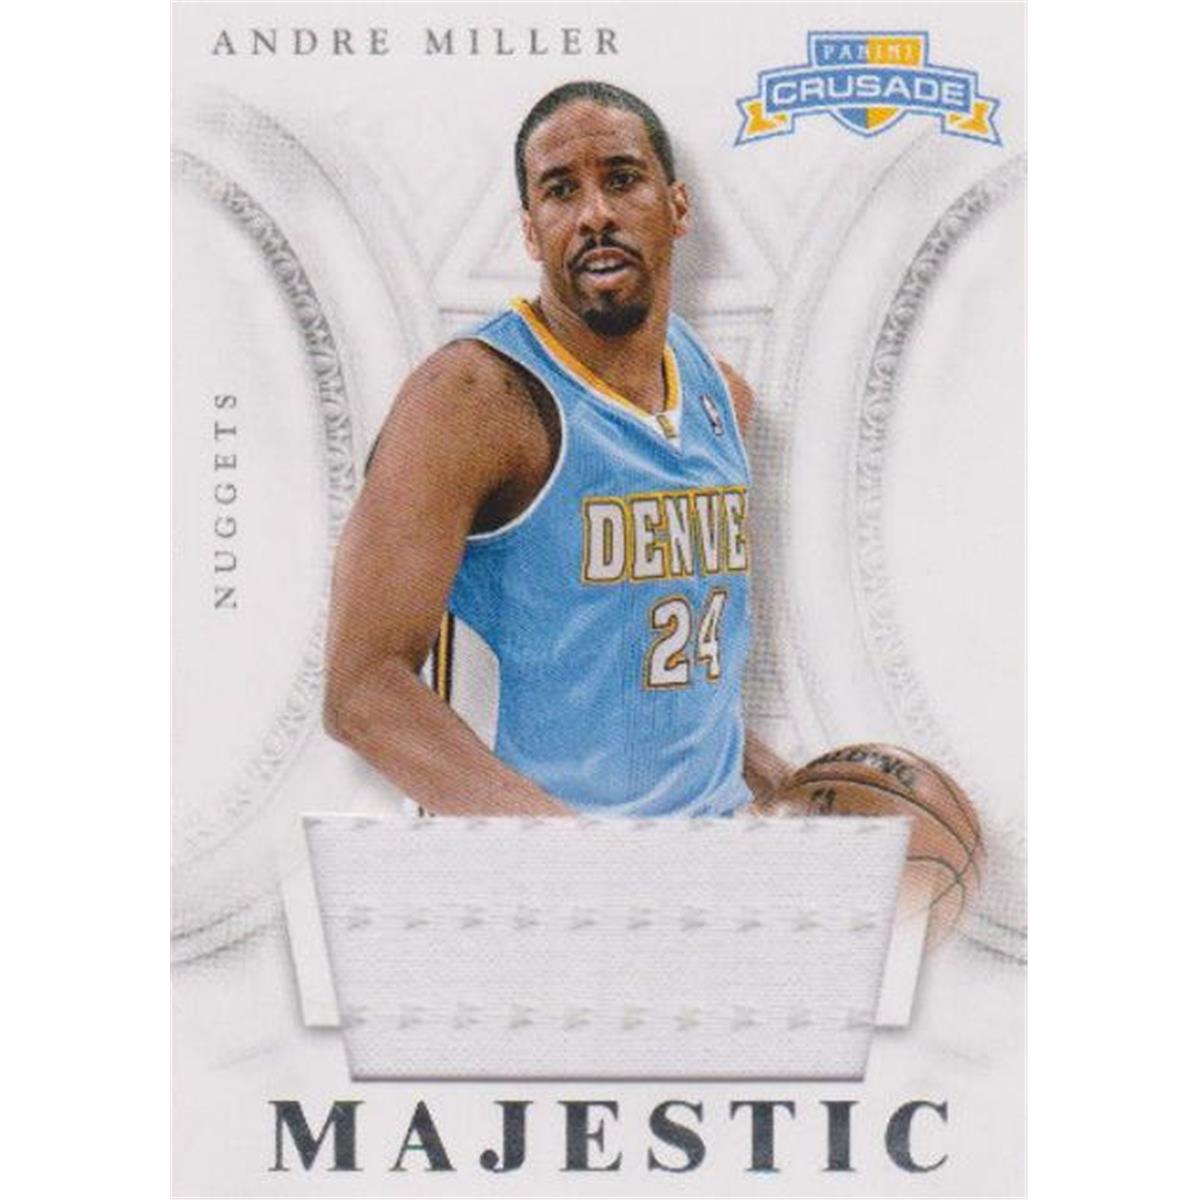 Autograph Warehouse 388293 Andre Miller Player Worn Jersey Patch Basketball Card 2013 Panini Crusade Majestic No. 2